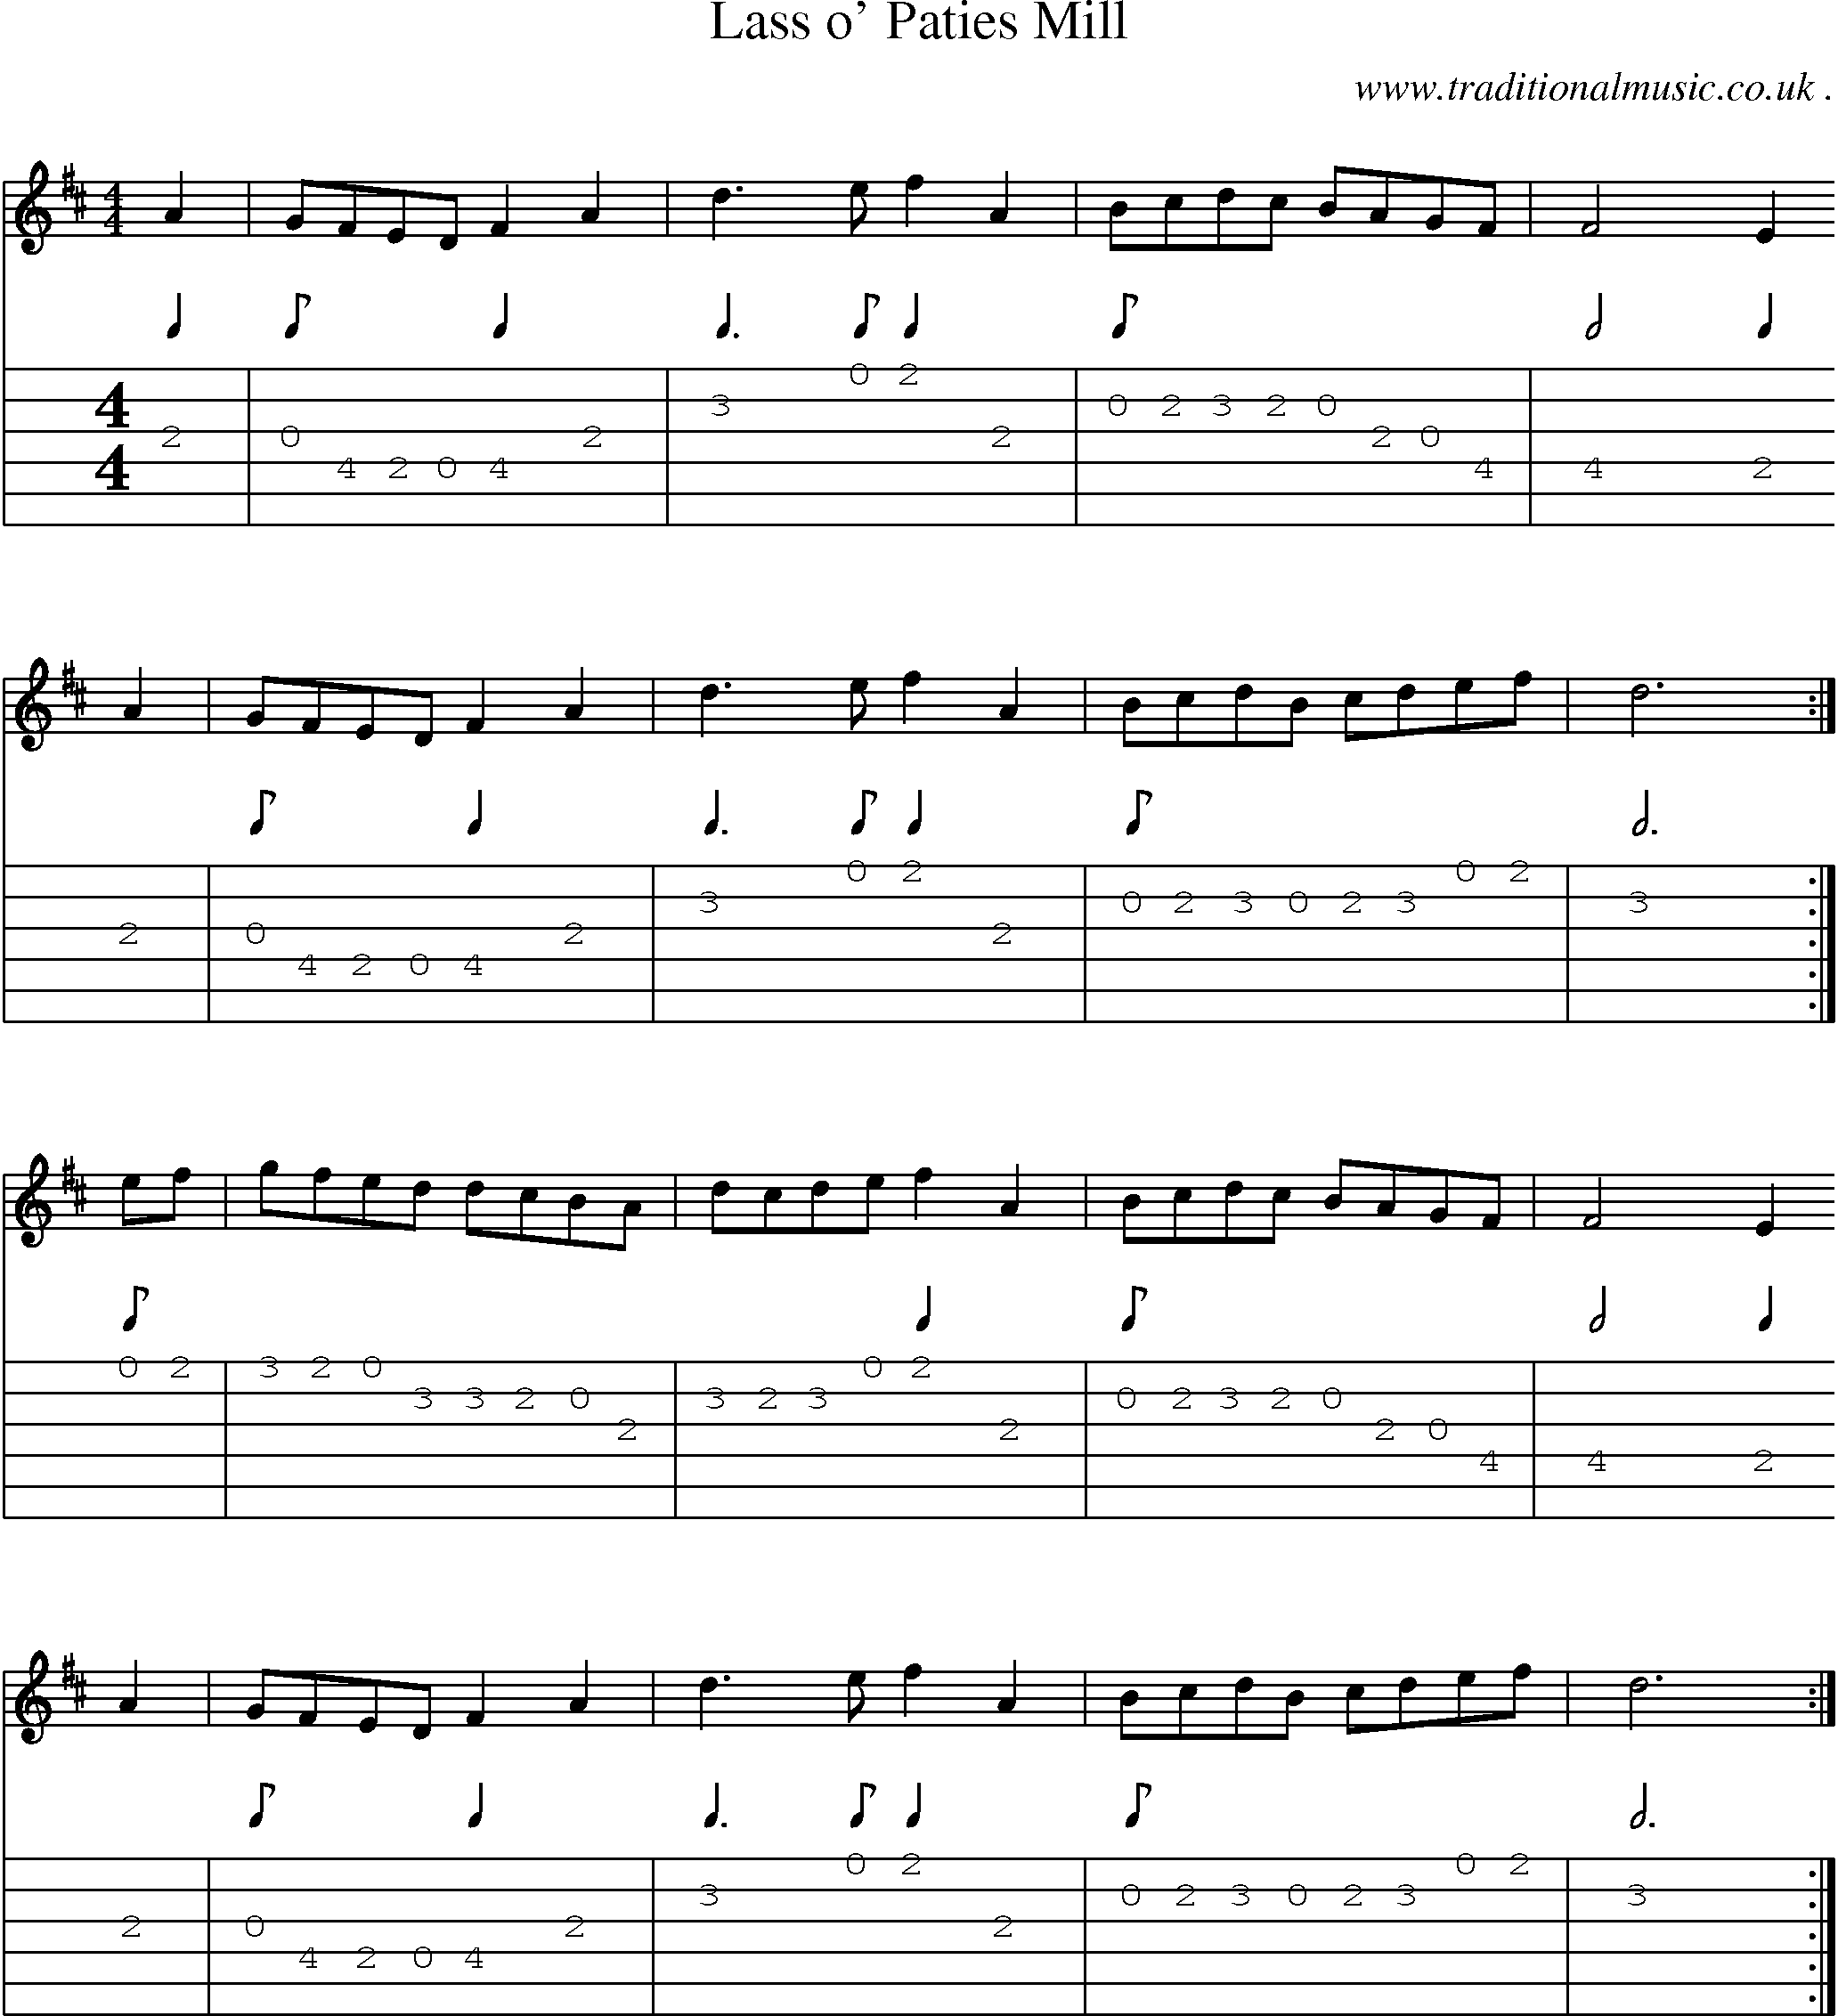 Sheet-music  score, Chords and Guitar Tabs for Lass O Paties Mill